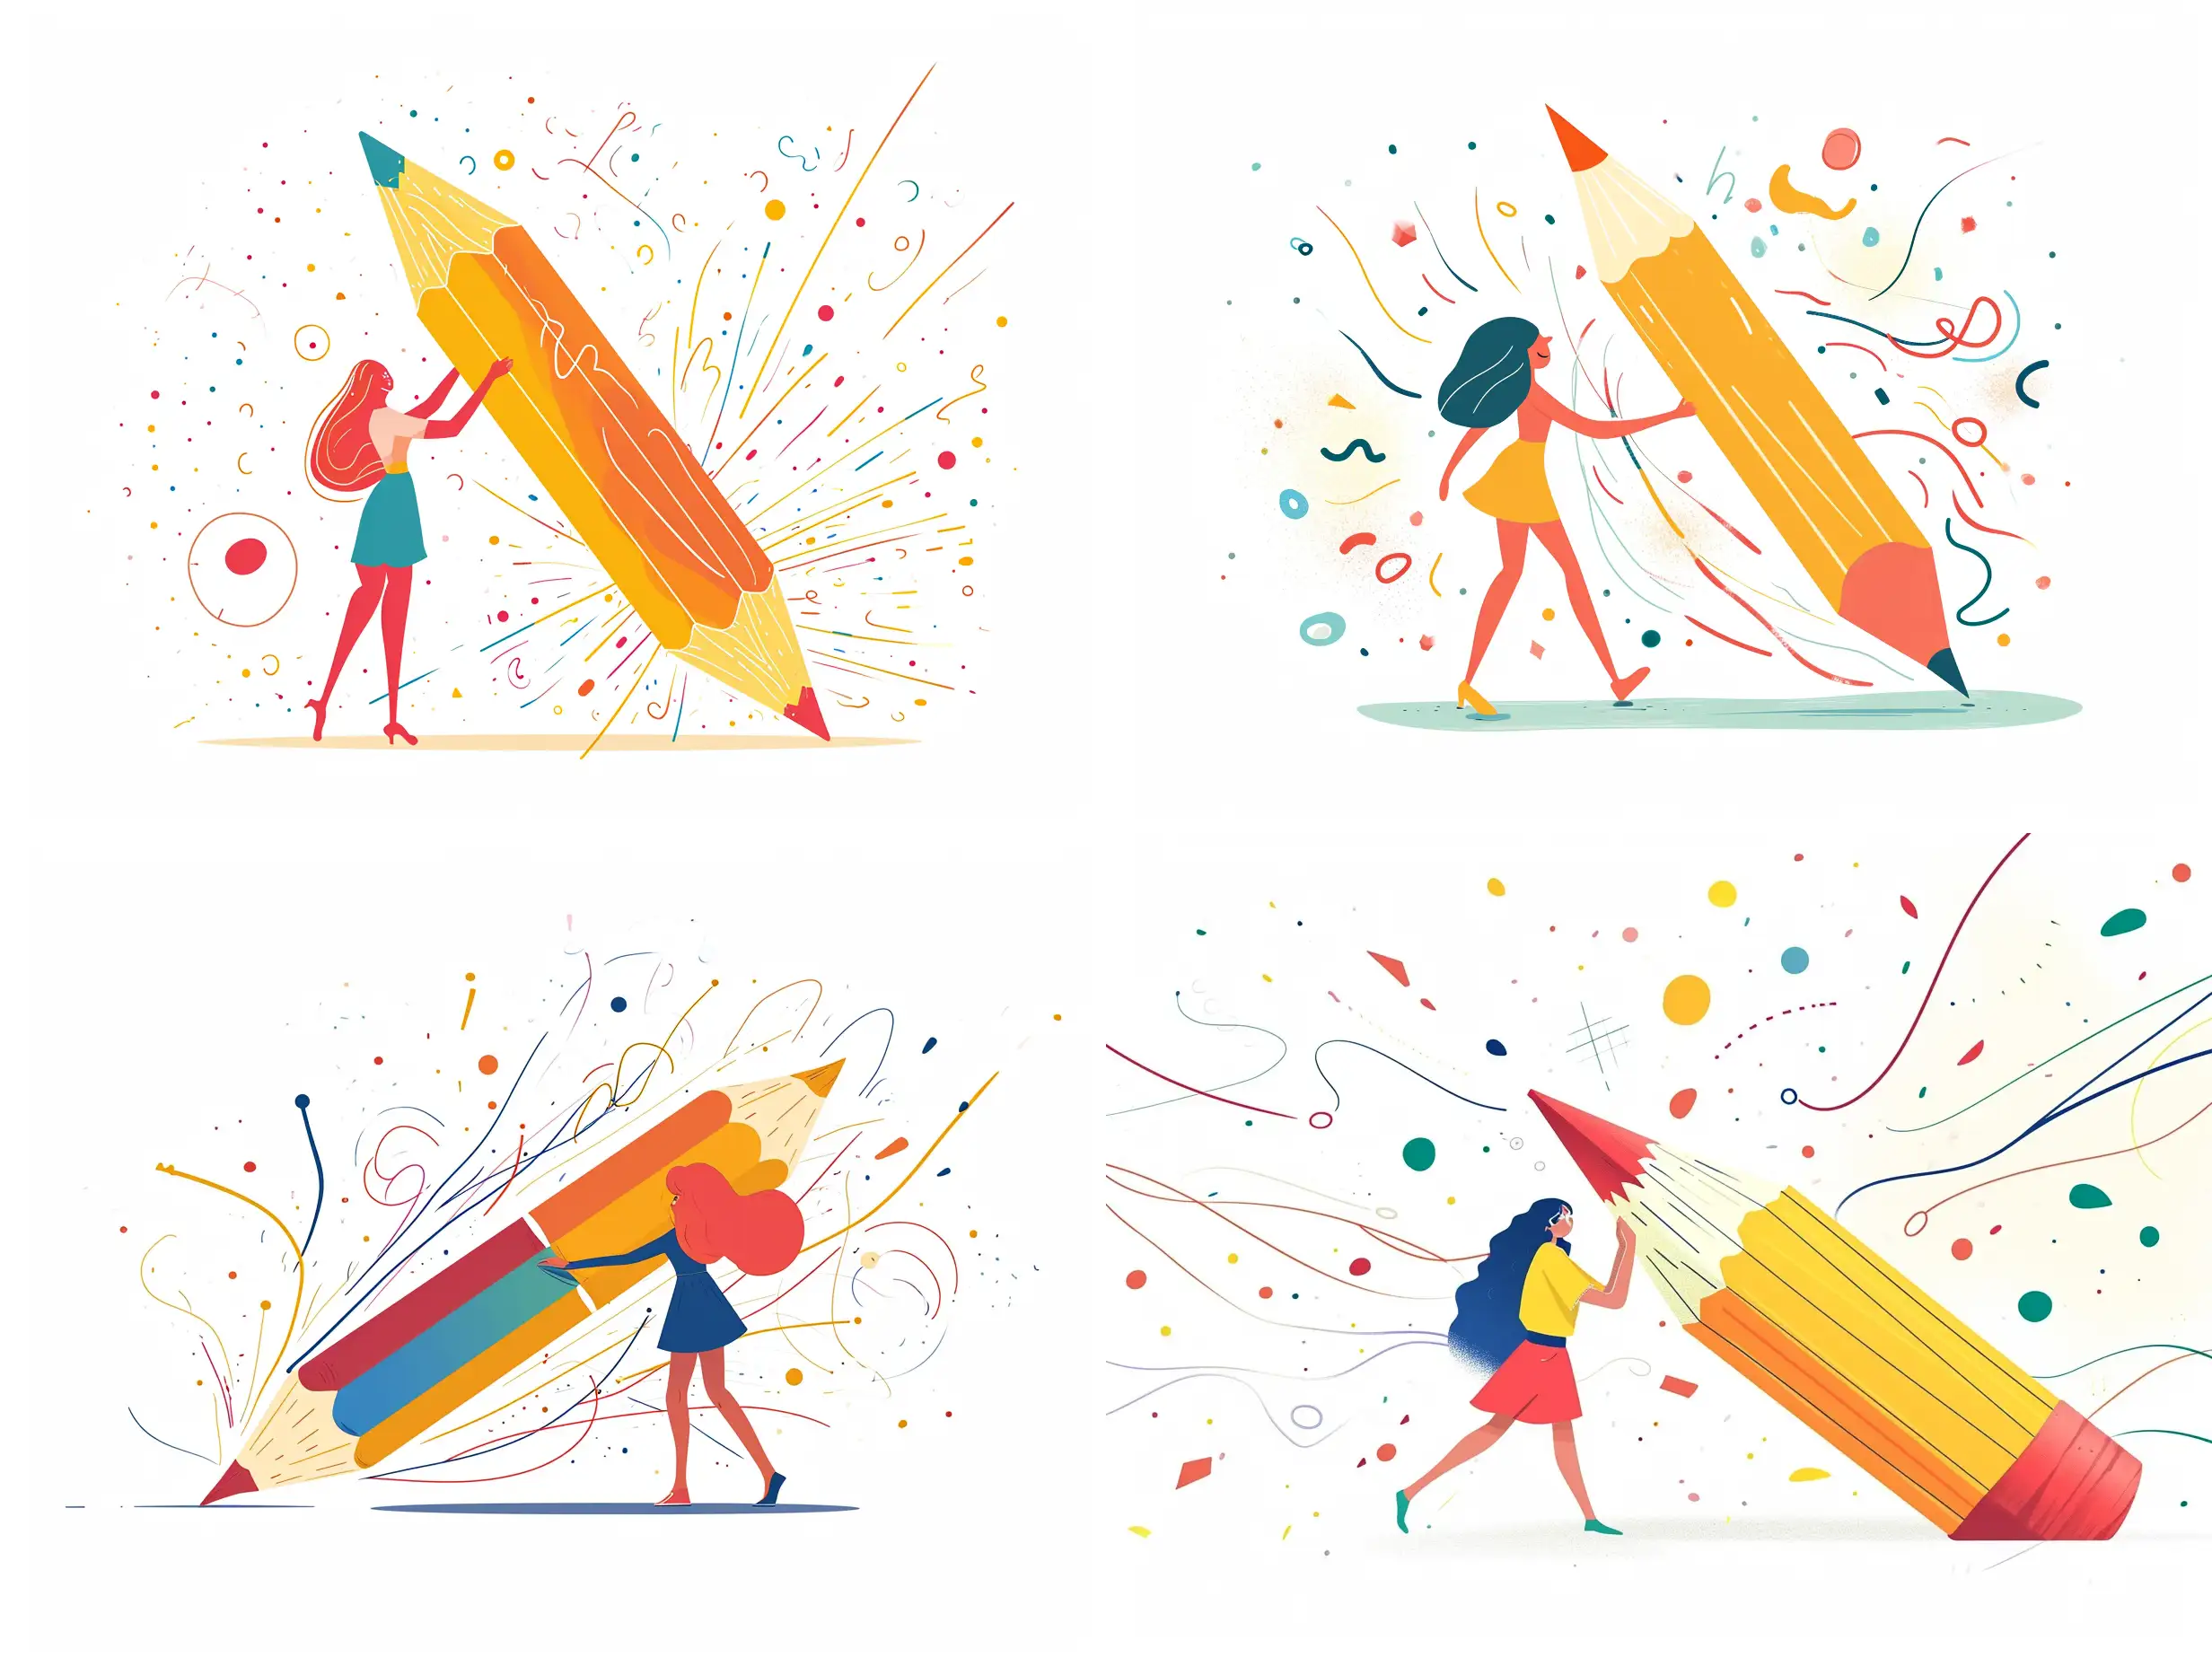 Create image is an abstract illustration featuring a stylized woman figure interacting with an oversized pencil, the background is in white solid color adorned with various small colorful shapes like circles and squiggles, the oversized pencil it’s significantly larger than the human figure, lines emanating from behind the pencil suggest rapid movement or force, in the style of dribbble, Behance and Creativemarket, 2d vector style, minimalist, simple, solid colors